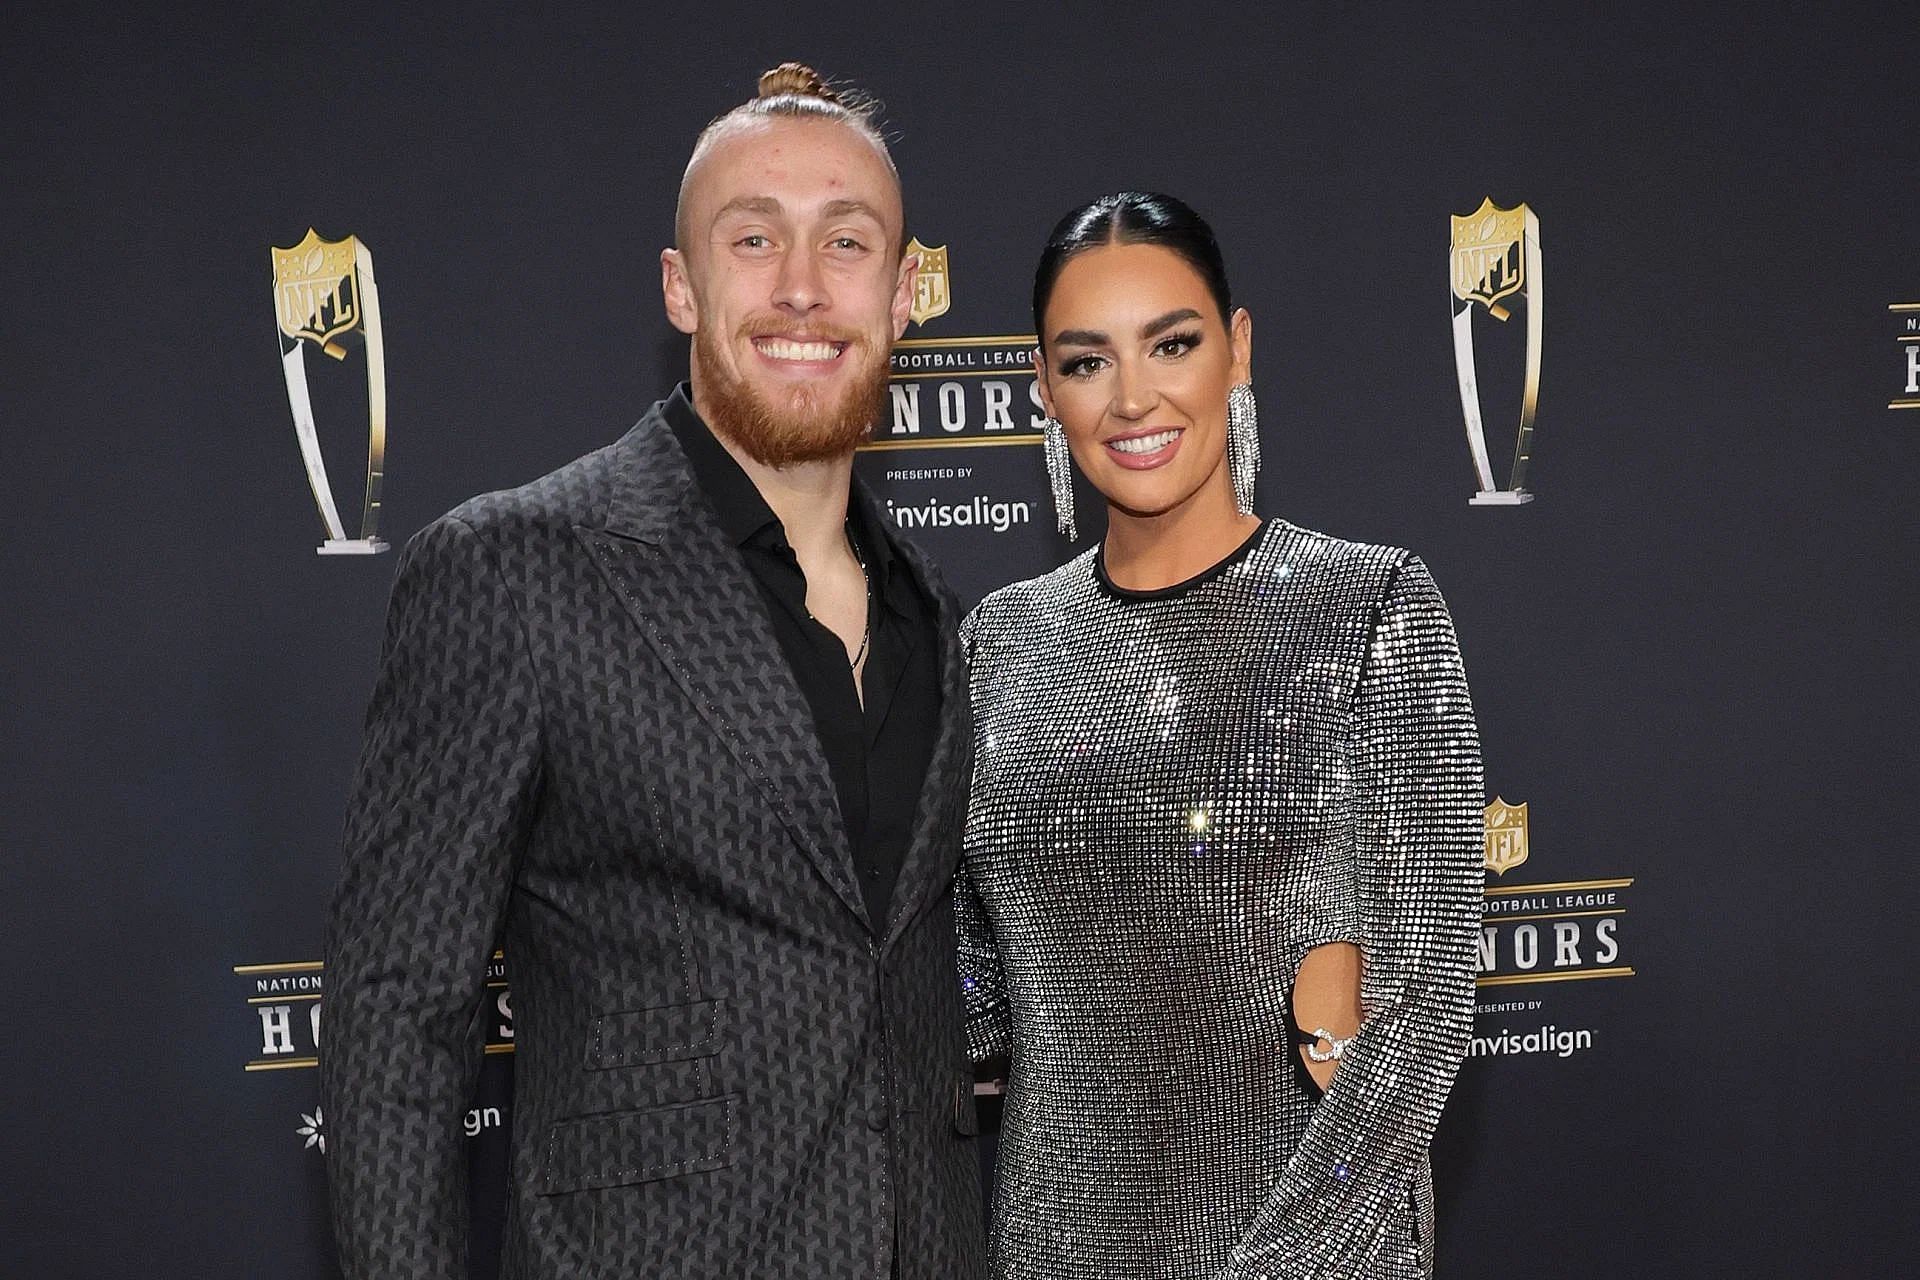 George Kittle at the 12th Annual NFL Honors - Arrival